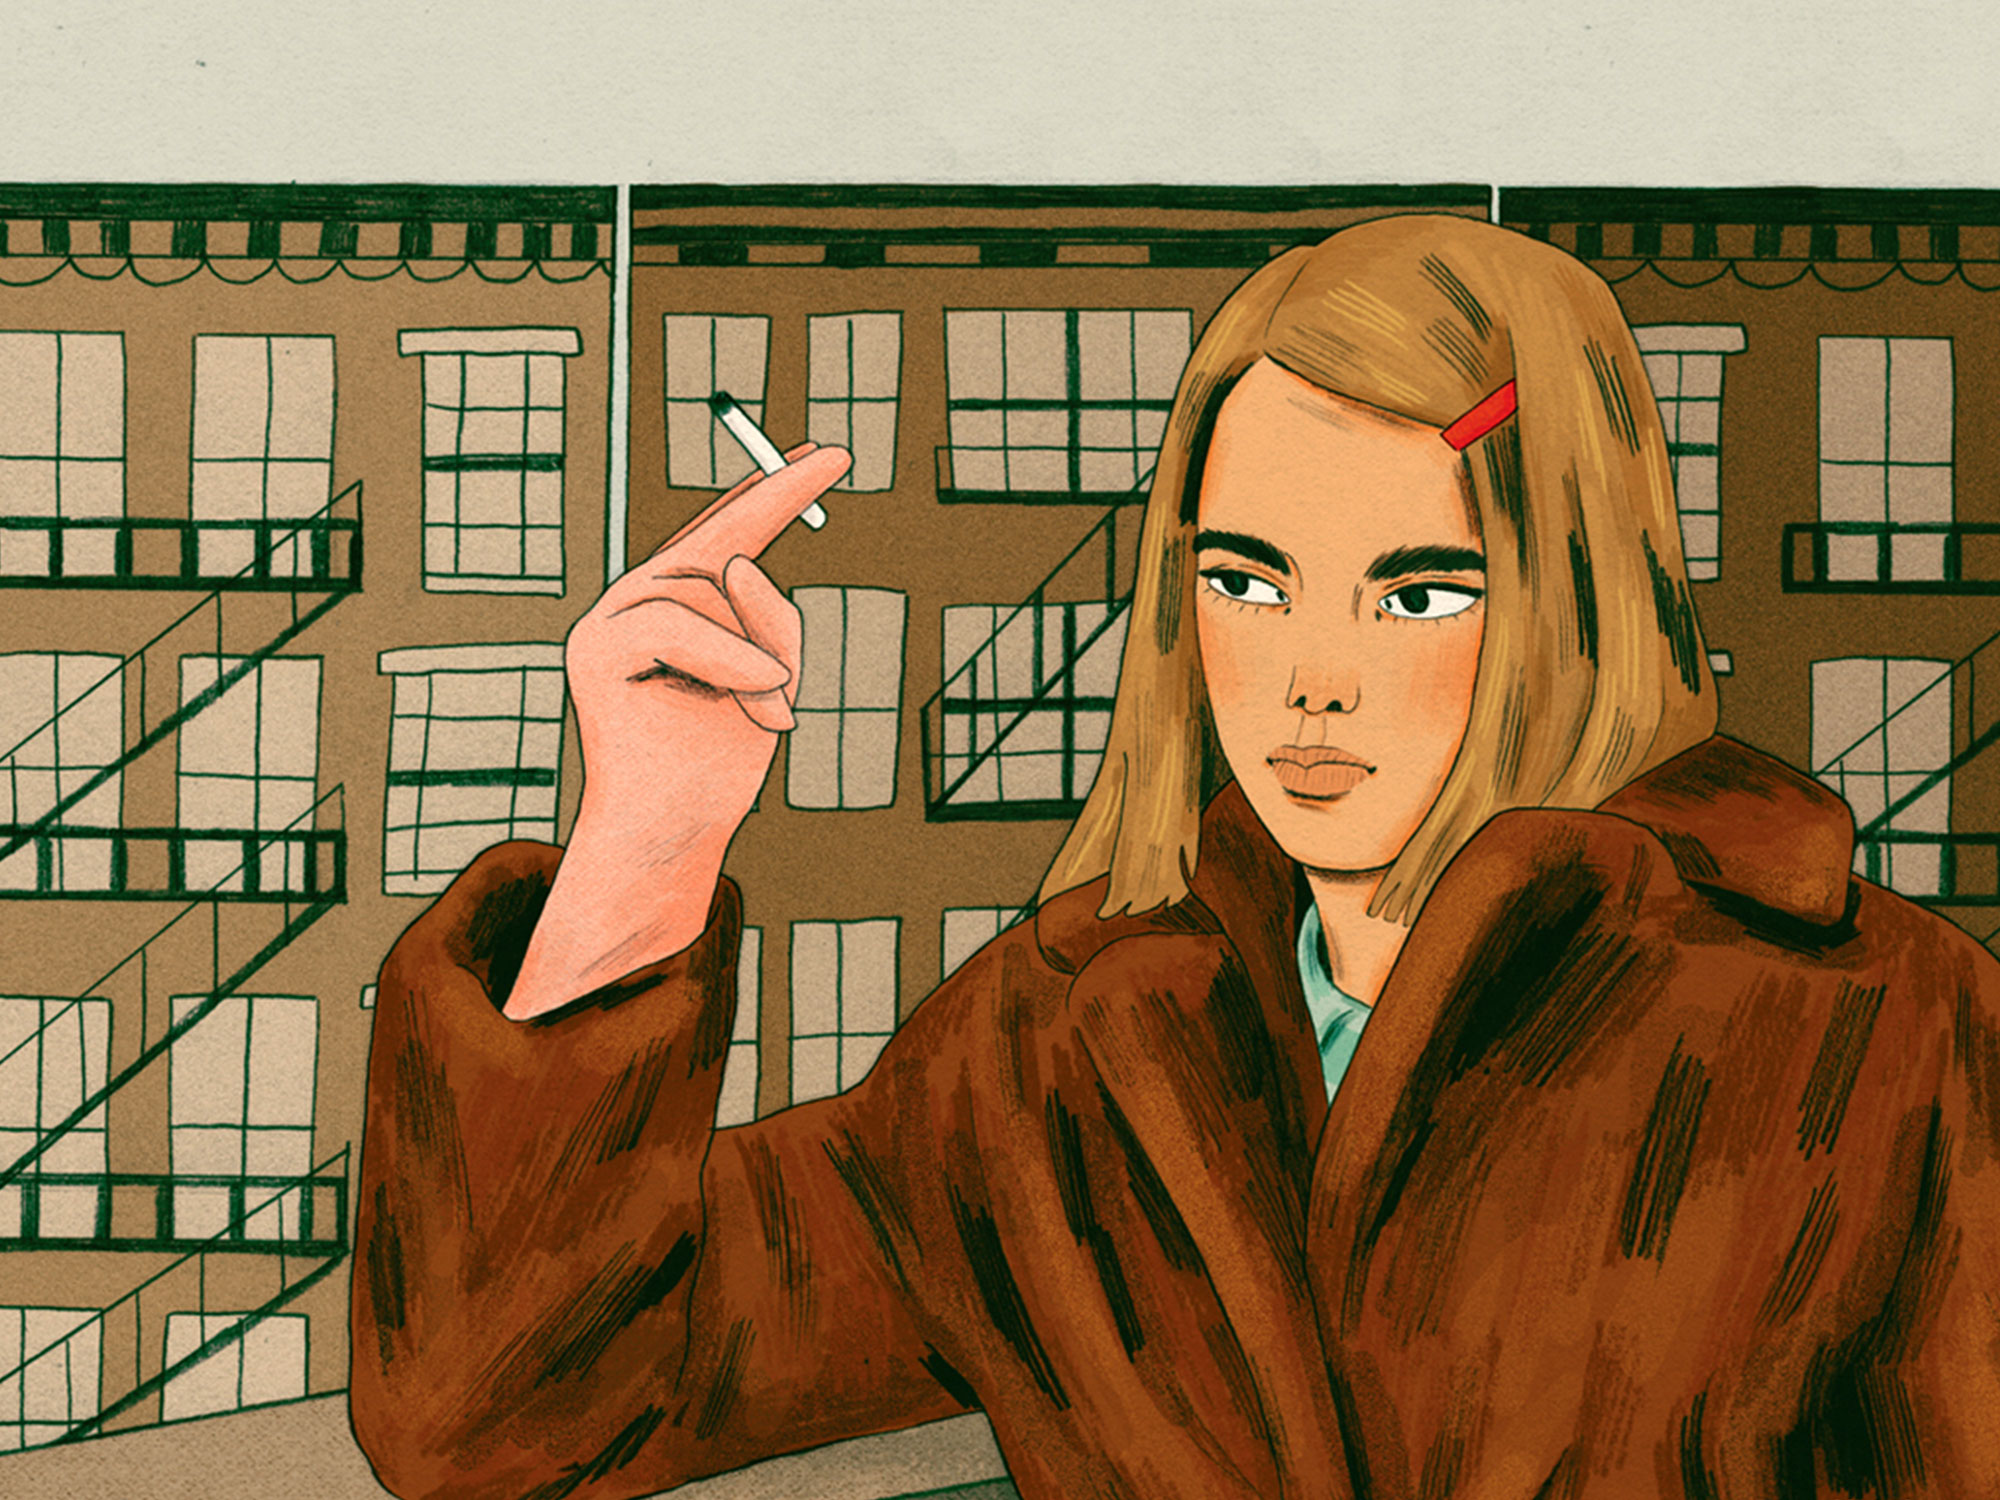 An illustrated zine dives into the world of Wes Anderson